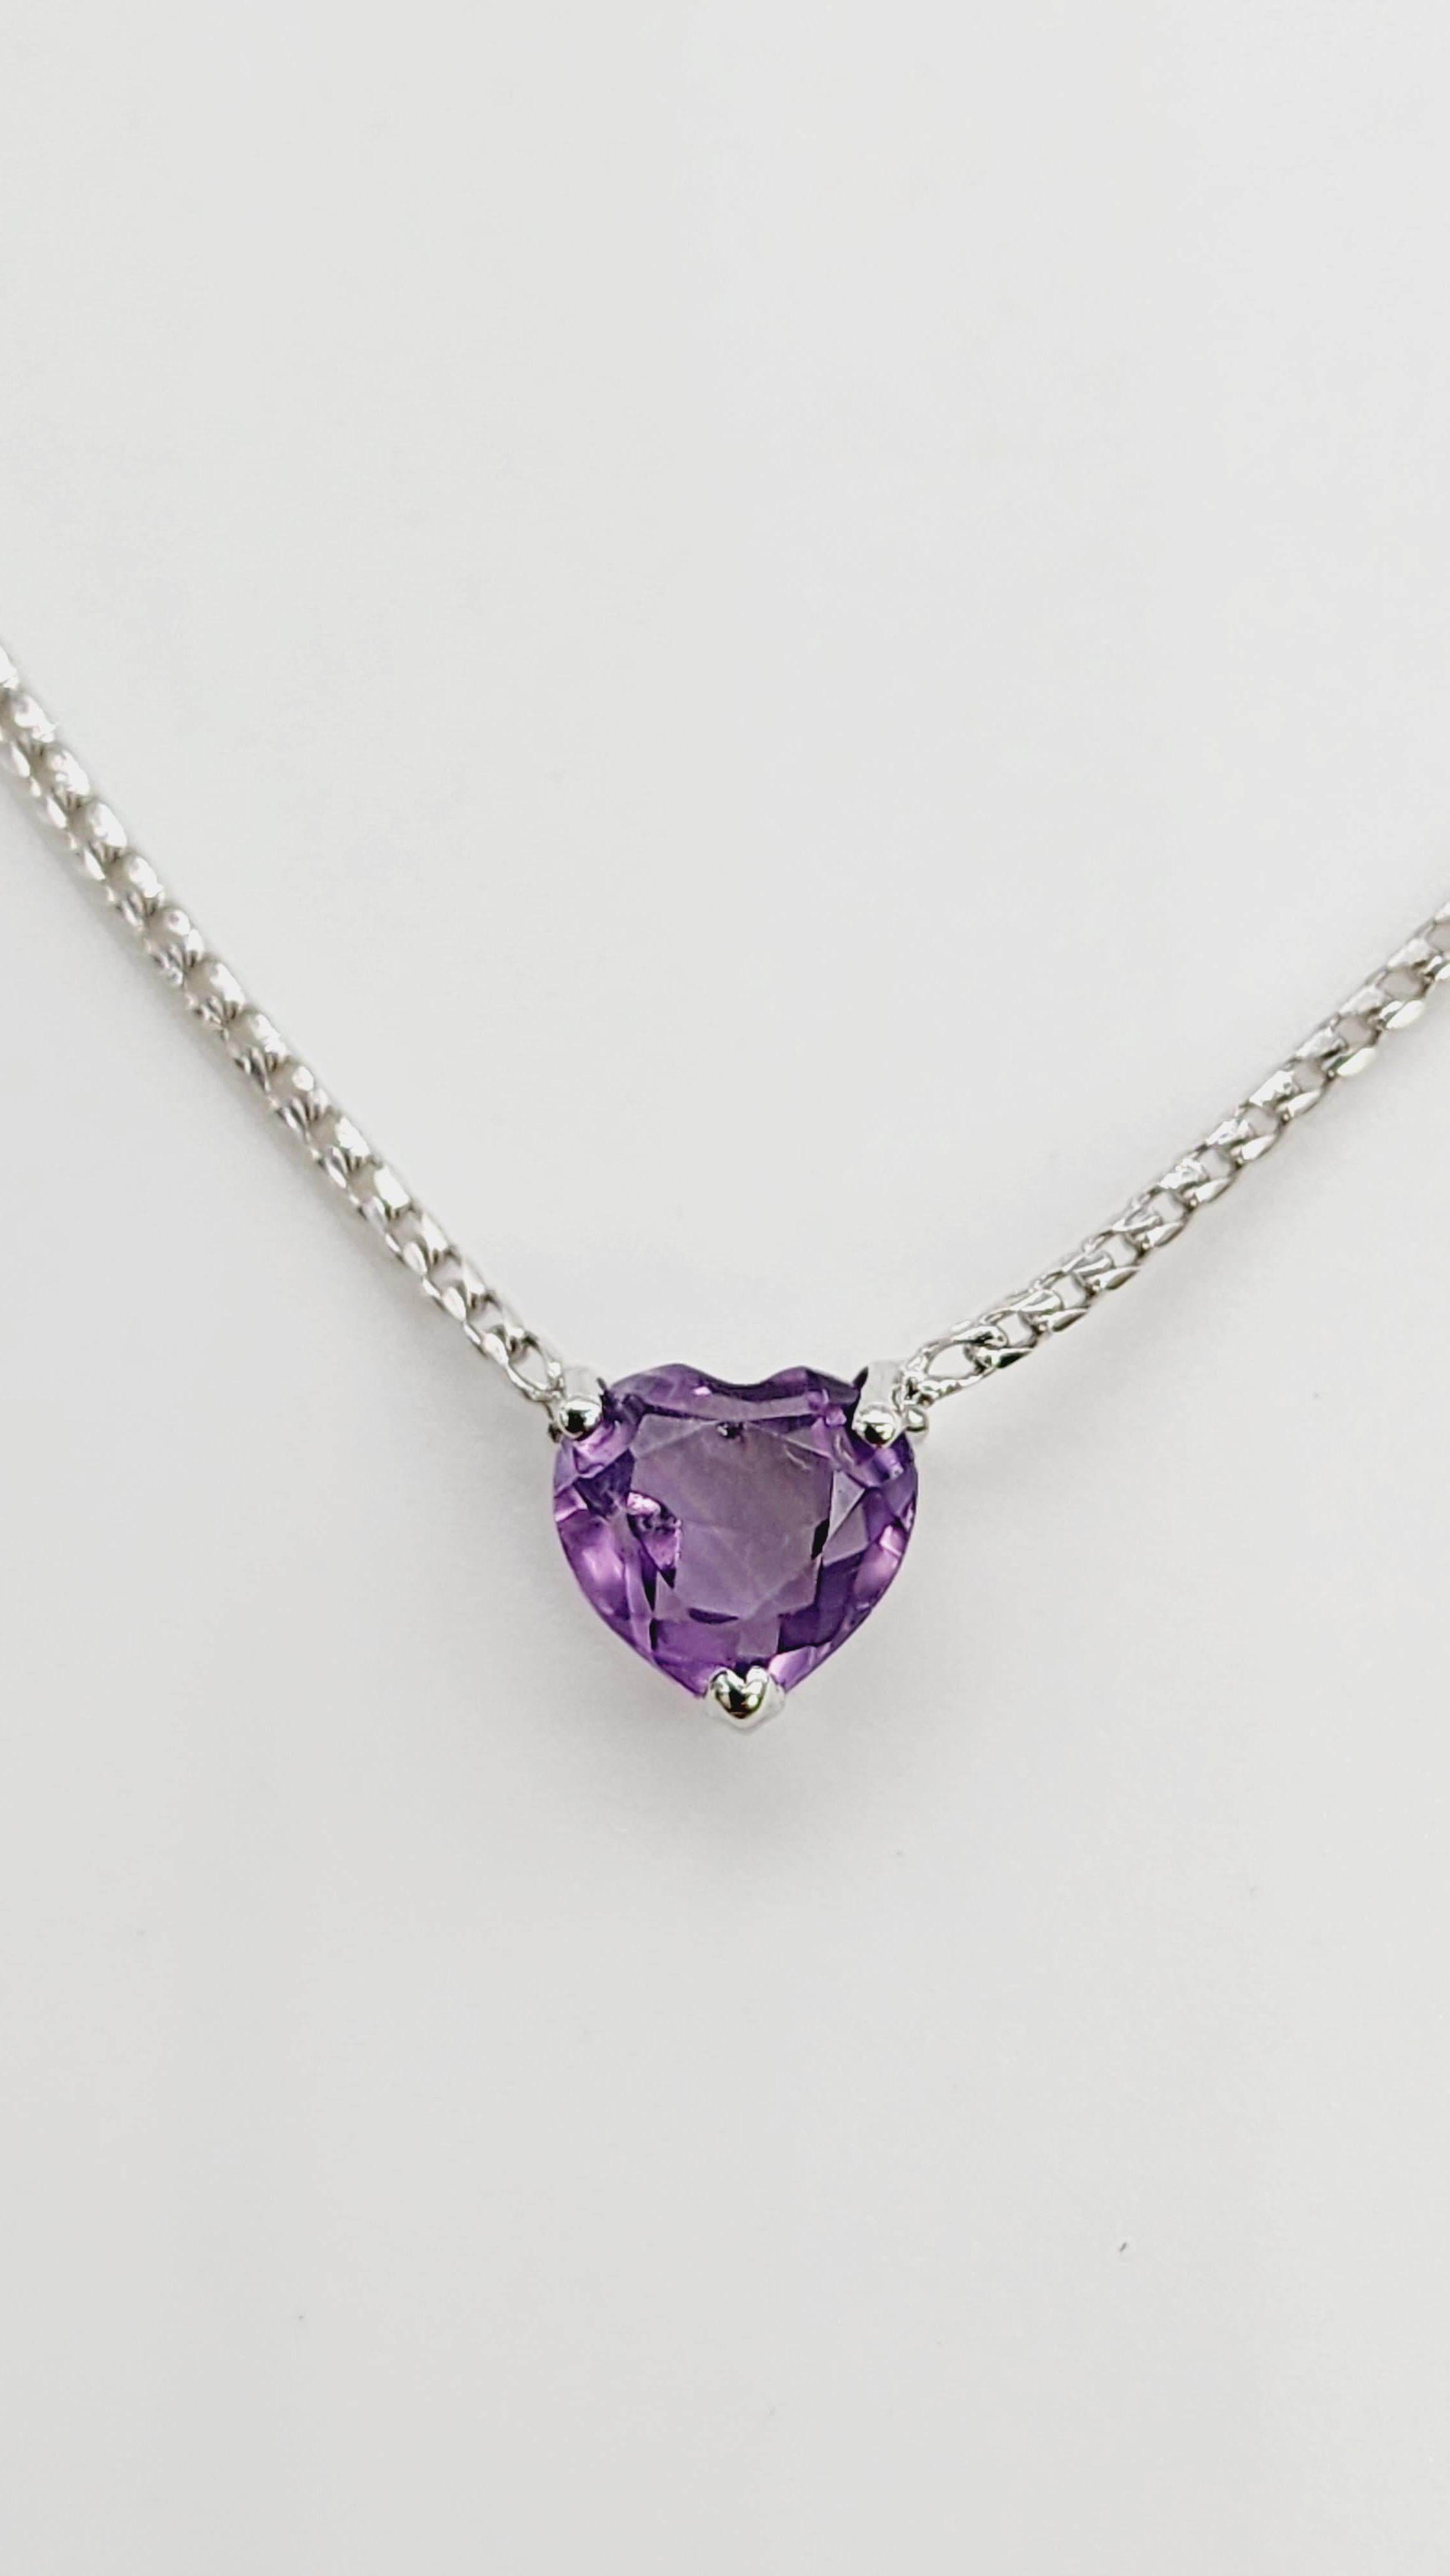 0.82 Carats  Heart Shape Amethyst Necklace 14 Karat White Gold set on 3 prong setting.  
The closure is an insert clasp with safety clasp. Length is 20 inches. Elegance you can wear.

*Free shipping within the U.S.*